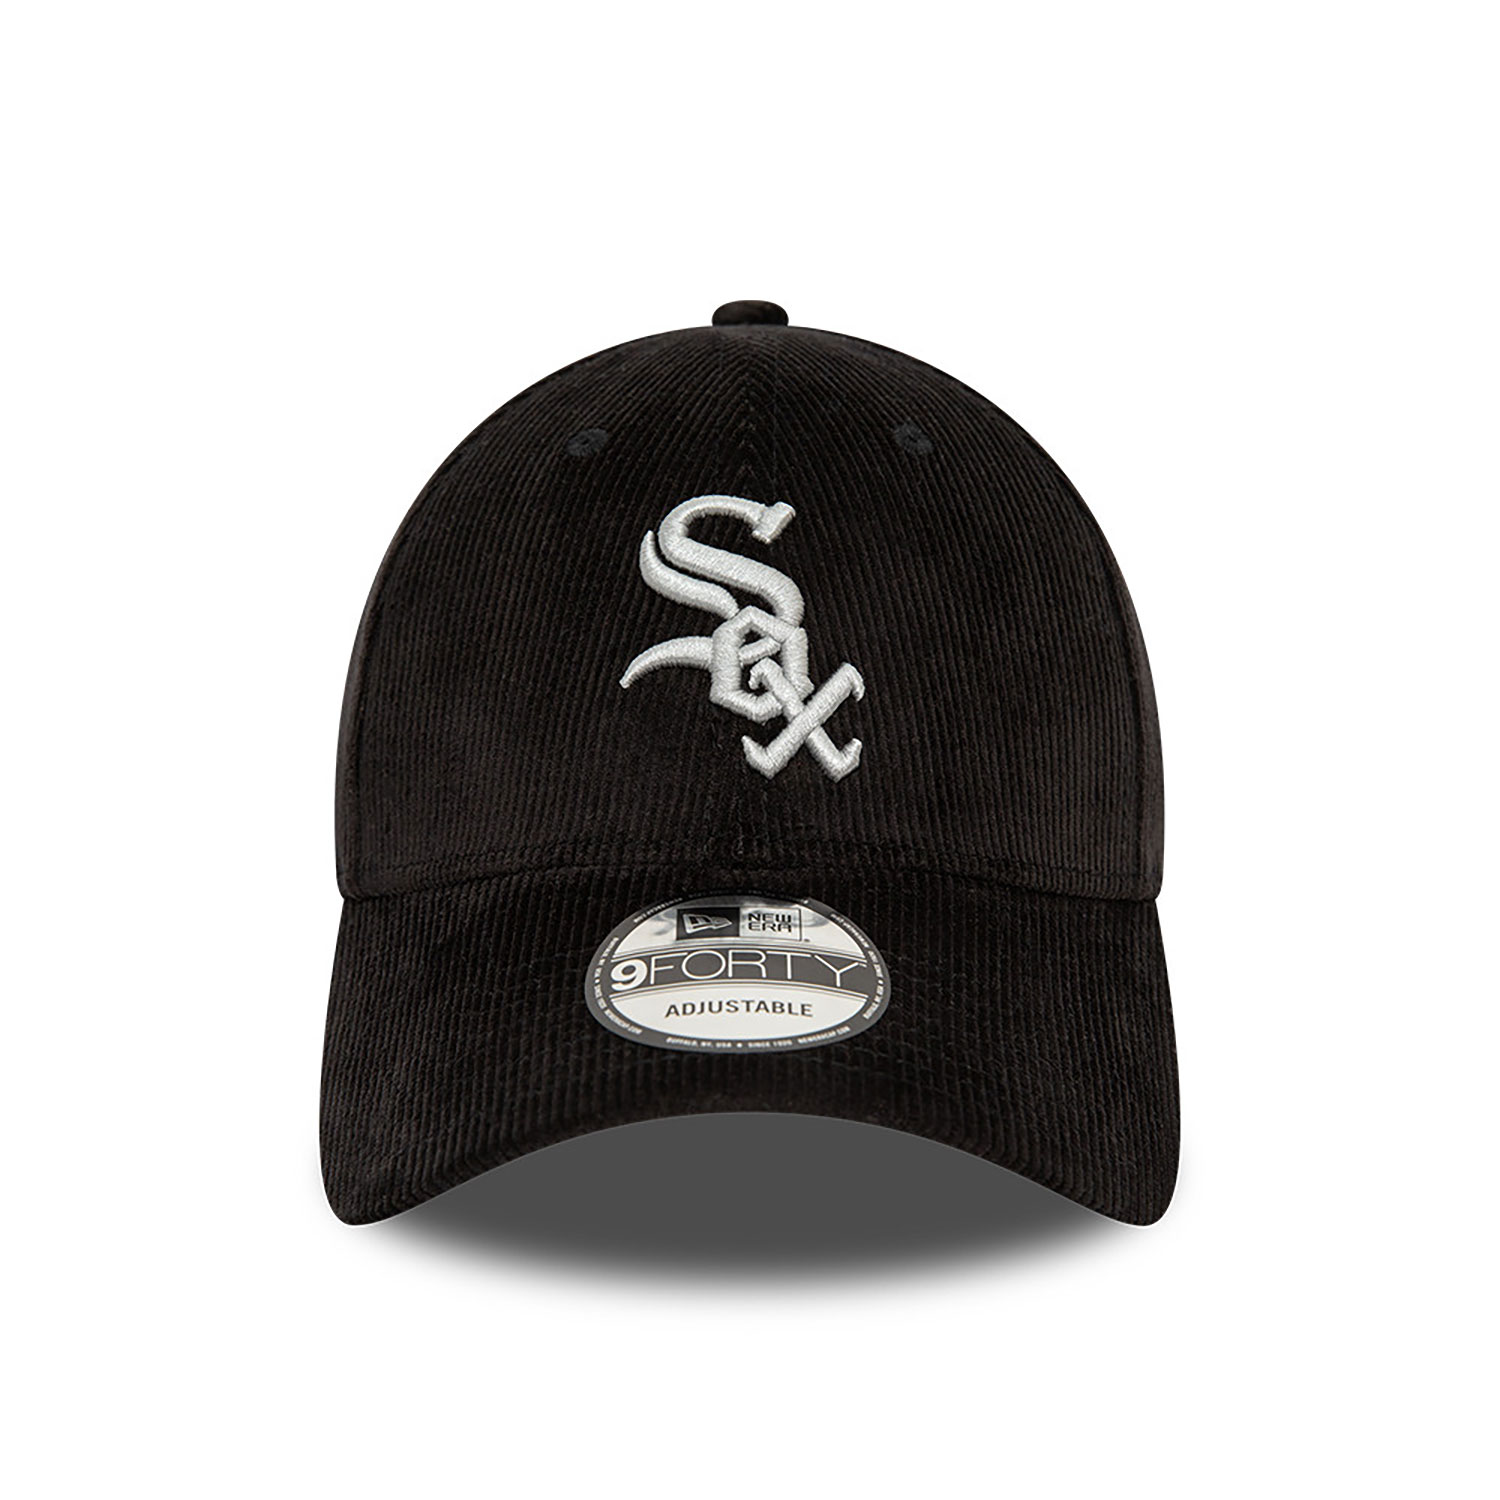 Chicago White Sox Cord Black 9FORTY Adjustable Cap